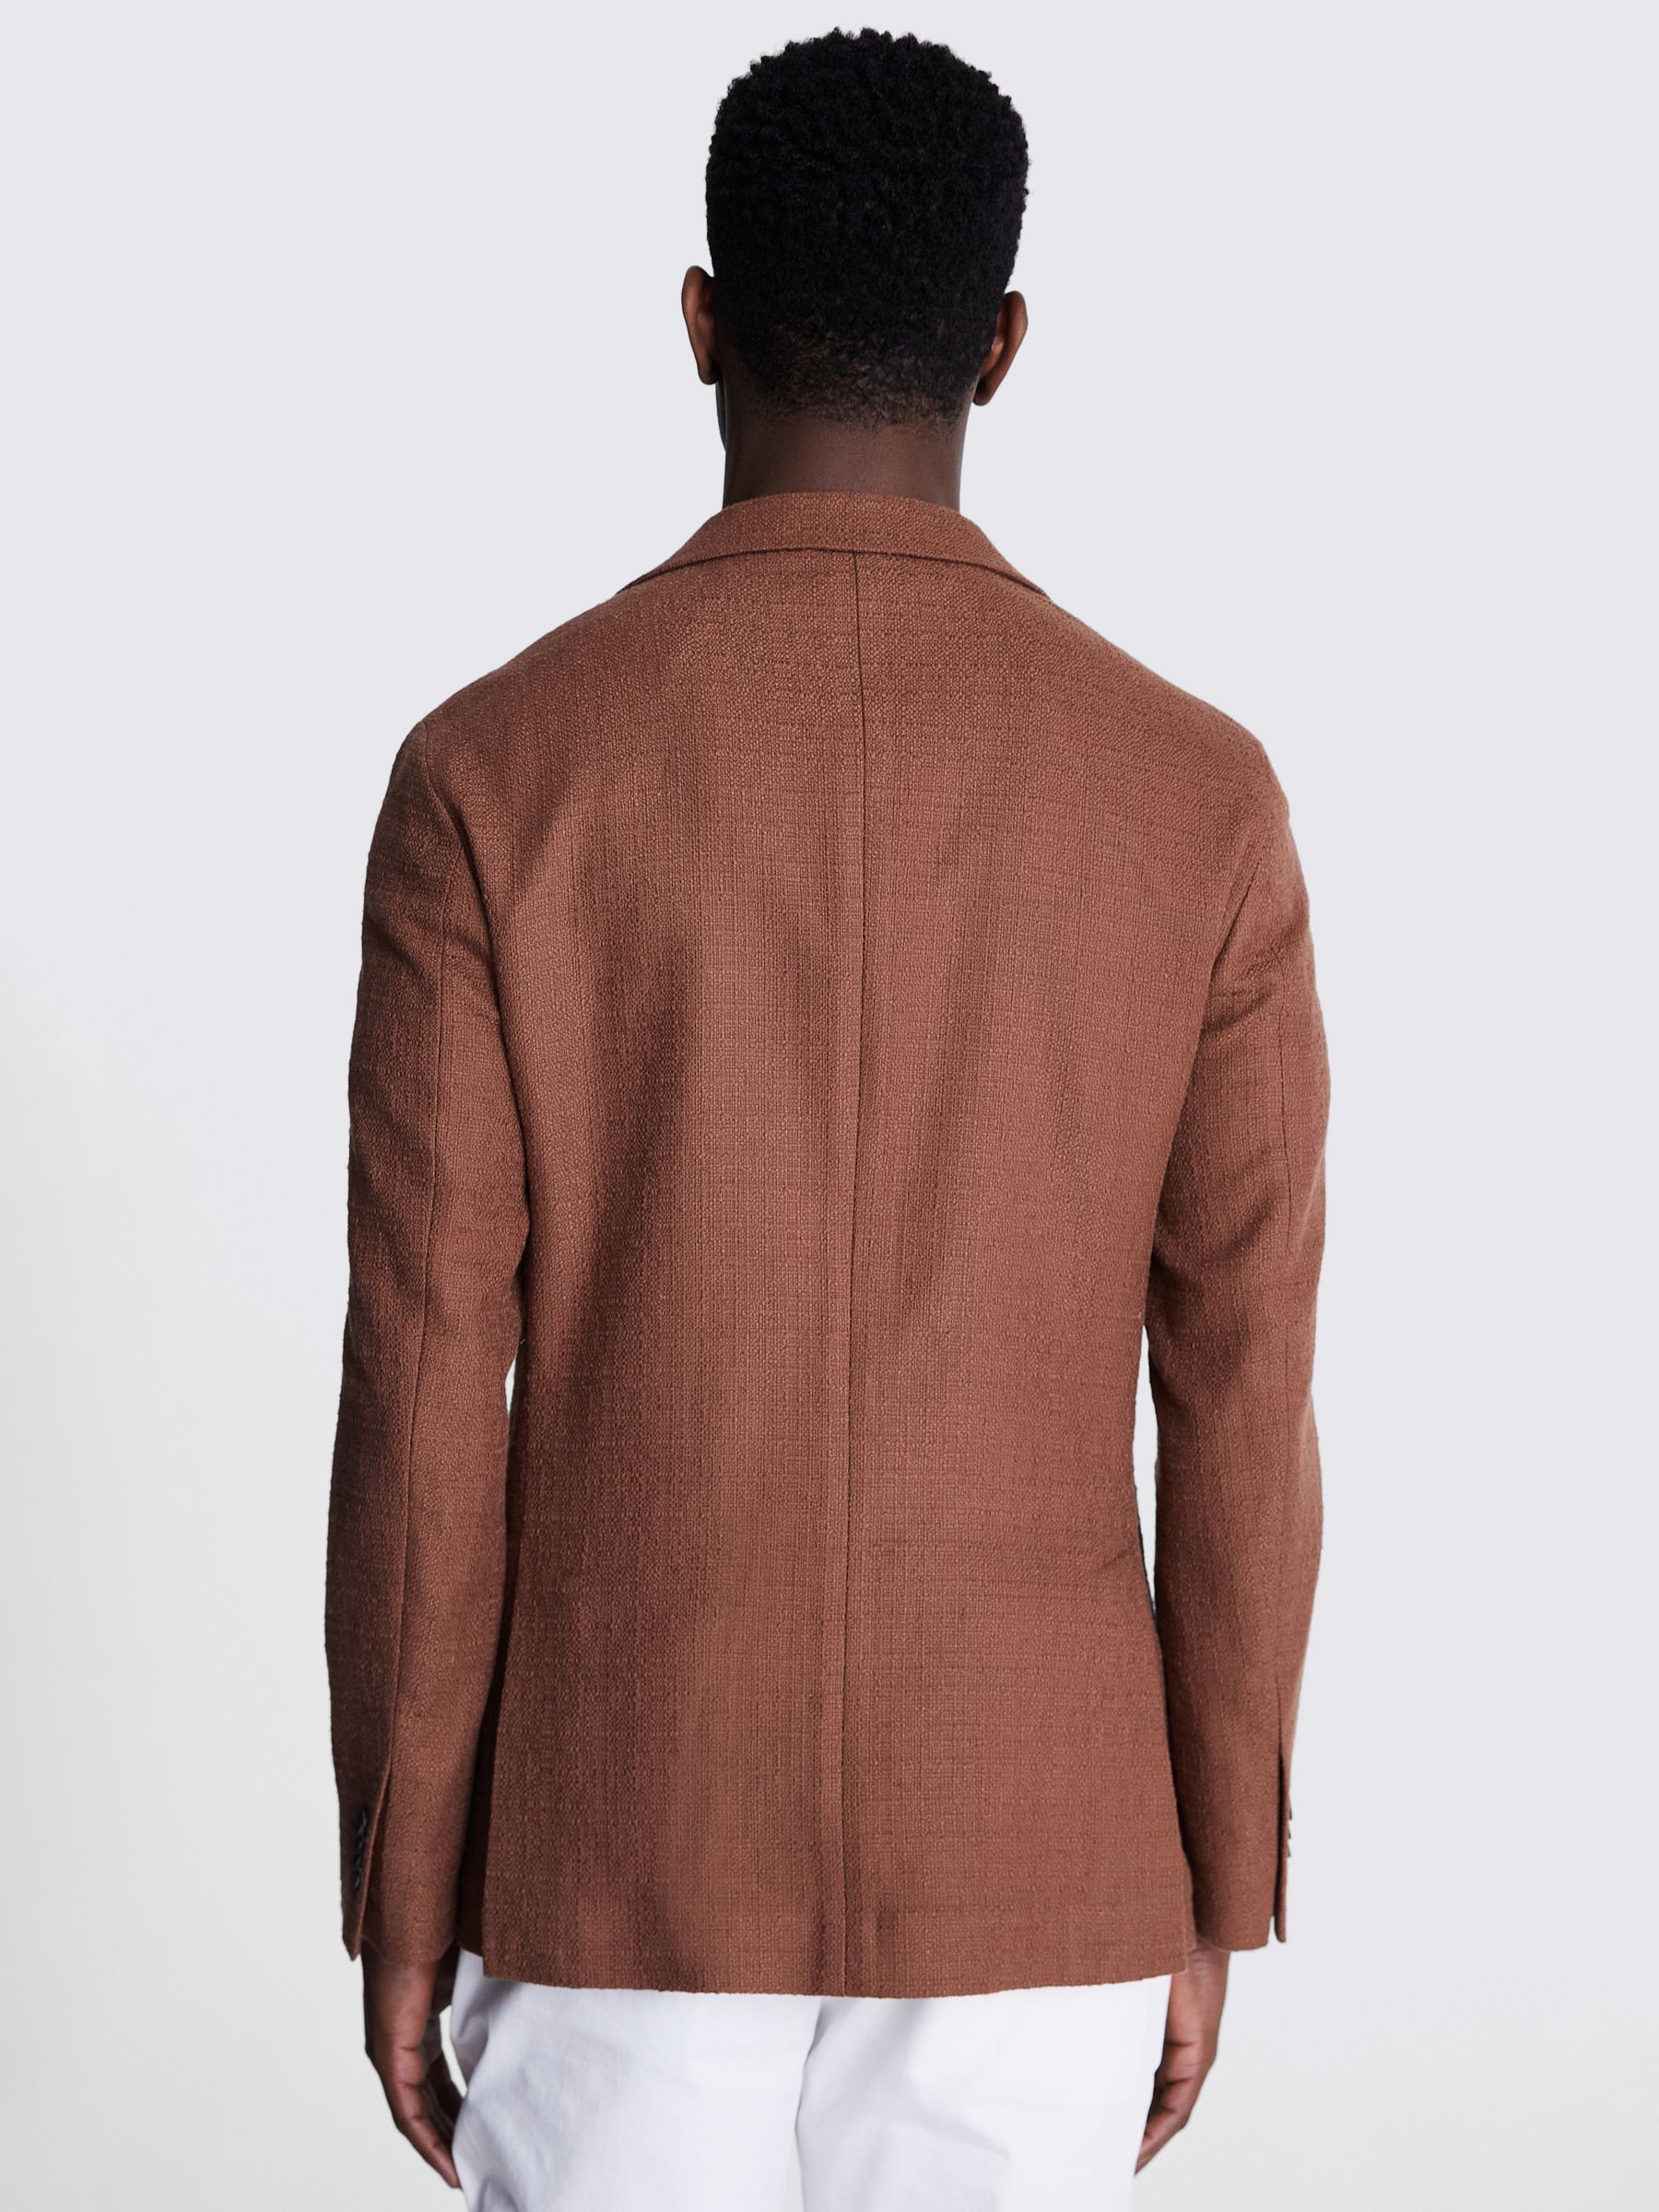 Buy Moss Hoxton Jacket, Brown Online at johnlewis.com